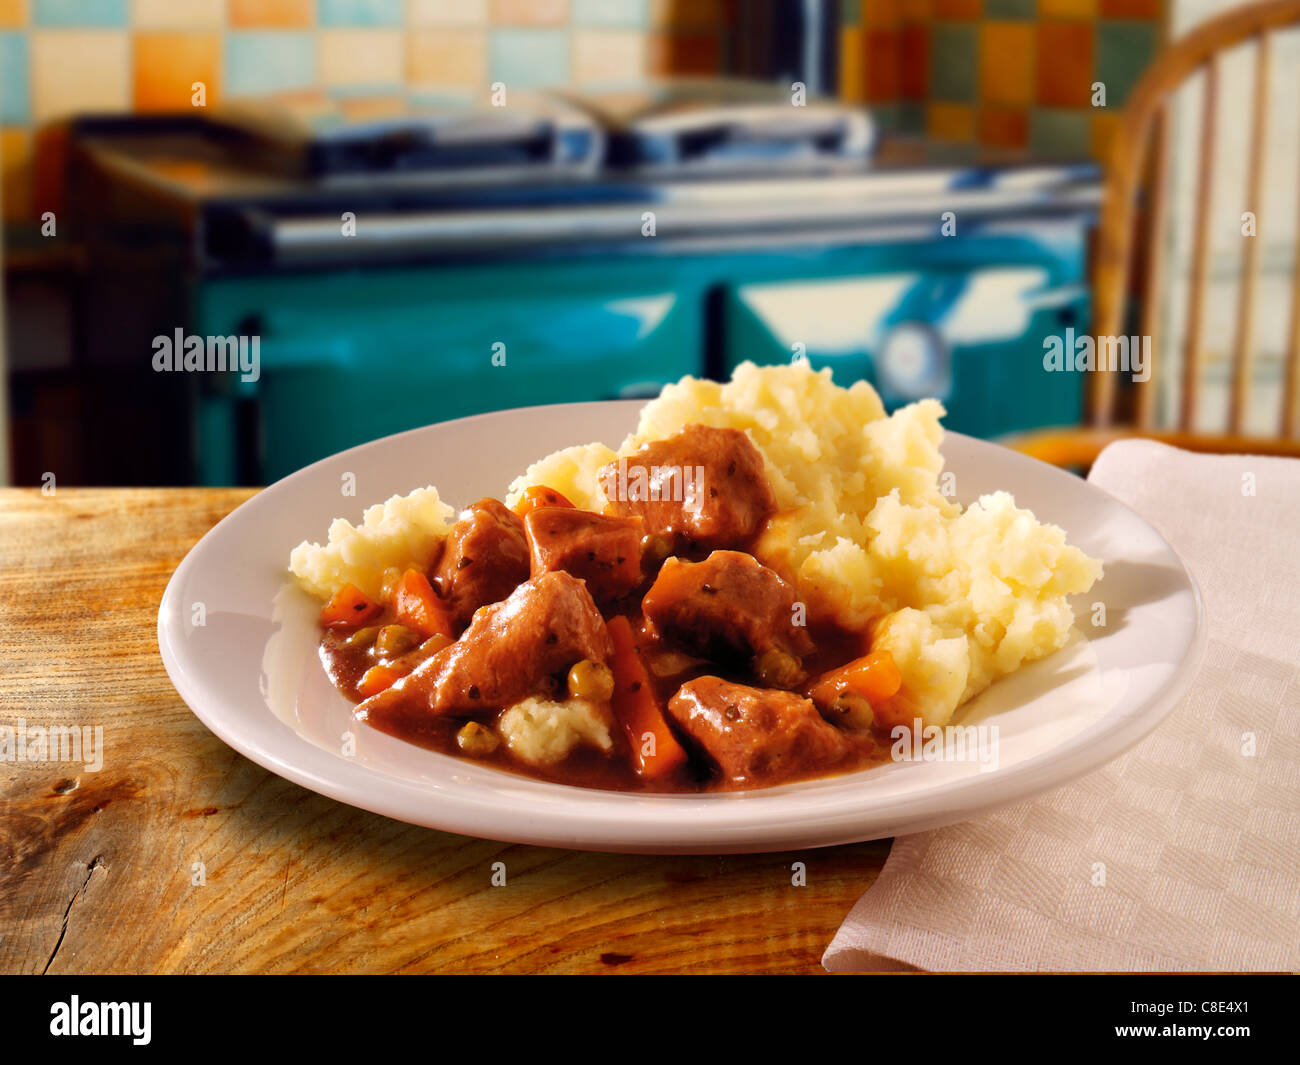 Traditional braised lamb casserole & mashed potato served on a plate on a wood table in a kitchen setting Stock Photo